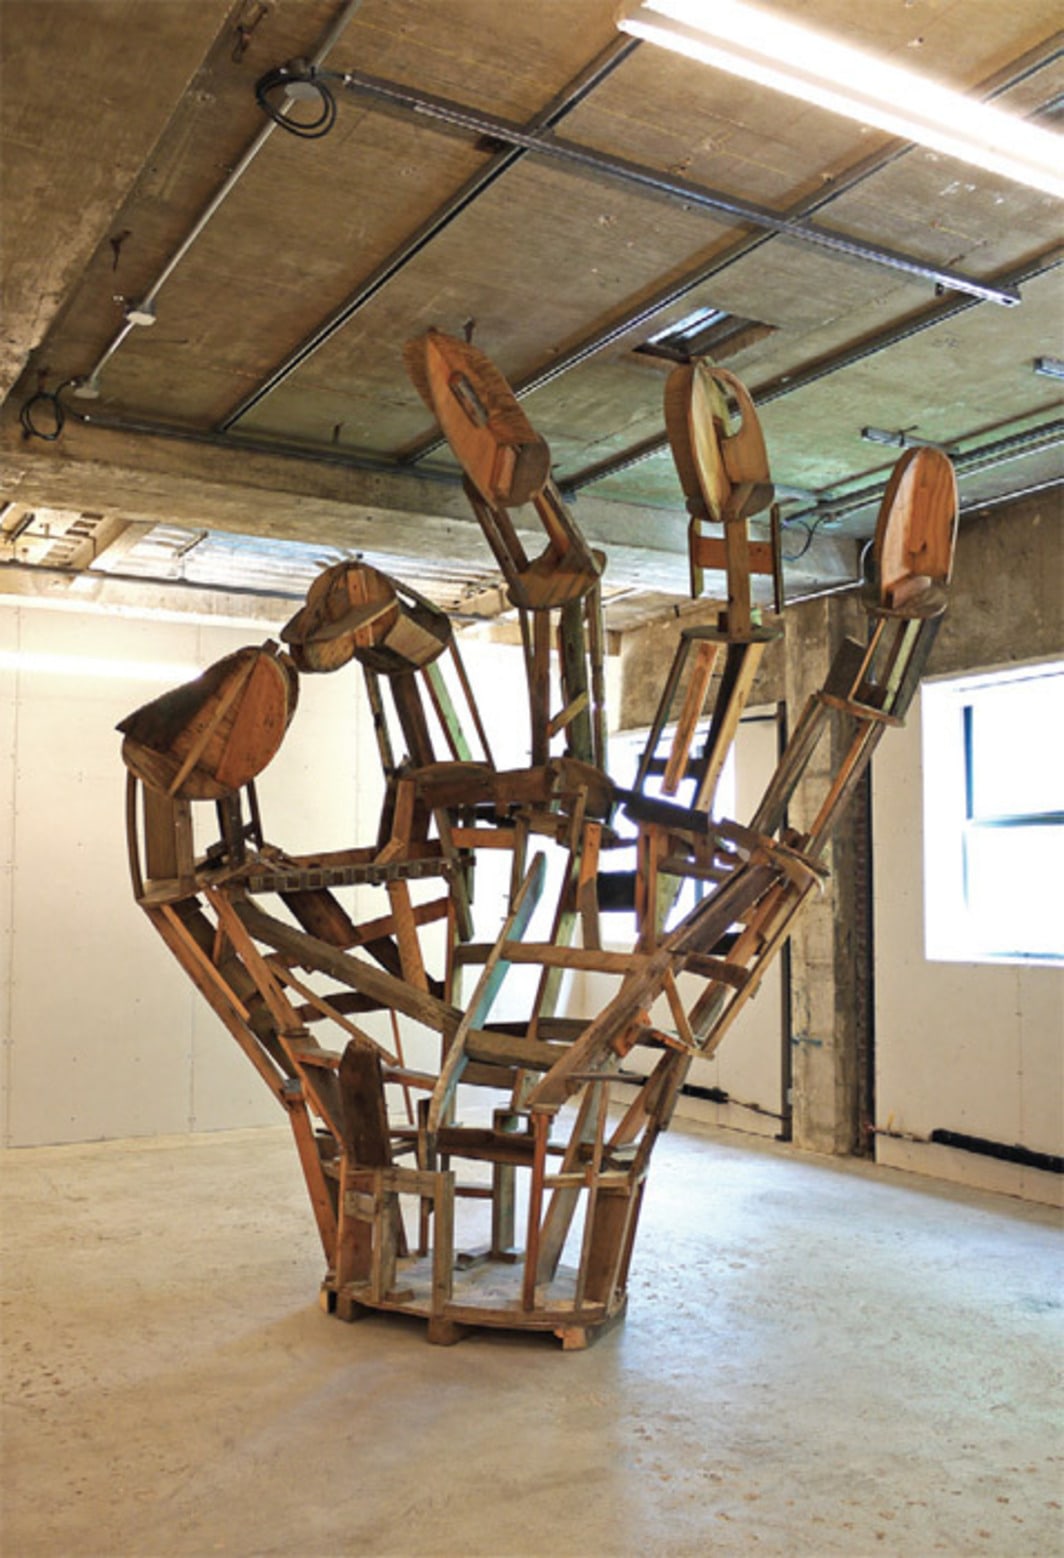 Peter Coffin,&nbsp;Untitled (Unfinished OK Hand), 2012, wood, wire mesh, bolts, screws, 12&#039; 7 1/2&ldquo; x 6&#039; 5&rdquo; x 11&#039; 6&quot;.